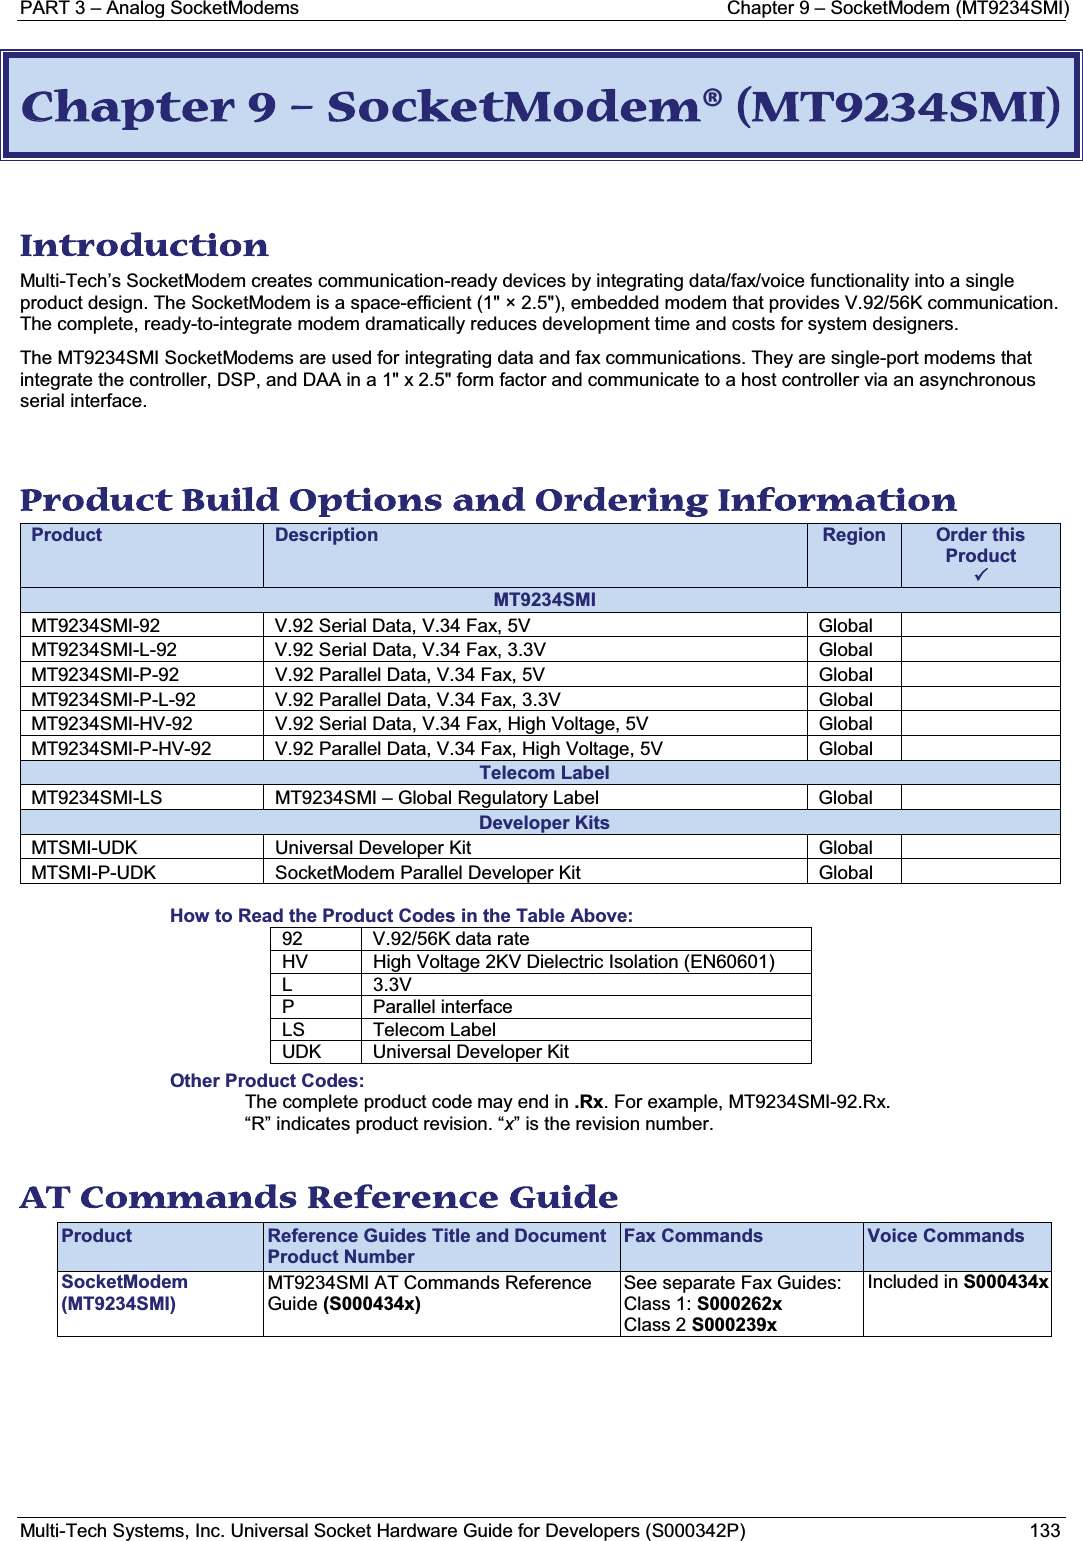 PART 3 – Analog SocketModems Chapter 9 – SocketModem (MT9234SMI)Multi-Tech Systems, Inc. Universal Socket Hardware Guide for Developers (S000342P) 133CChapter 9 – SocketModem® (MT9234SMI) Introduction Multi-Tech’s SocketModem creates communication-ready devices by integrating data/fax/voice functionality into a single product design. The SocketModem is a space-efficient (1&quot; × 2.5&quot;), embedded modem that provides V.92/56K communication. The complete, ready-to-integrate modem dramatically reduces development time and costs for system designers. The MT9234SMI SocketModems are used for integrating data and fax communications. They are single-port modems that integrate the controller, DSP, and DAA in a 1&quot; x 2.5&quot; form factor and communicate to a host controller via an asynchronous serial interface.Product Build Options and Ordering Information Product Description Region Order this Product3MT9234SMIMT9234SMI-92 V.92 Serial Data, V.34 Fax, 5V GlobalMT9234SMI-L-92 V.92 Serial Data, V.34 Fax, 3.3V GlobalMT9234SMI-P-92 V.92 Parallel Data, V.34 Fax, 5V GlobalMT9234SMI-P-L-92 V.92 Parallel Data, V.34 Fax, 3.3V GlobalMT9234SMI-HV-92 V.92 Serial Data, V.34 Fax, High Voltage, 5V GlobalMT9234SMI-P-HV-92 V.92 Parallel Data, V.34 Fax, High Voltage, 5V GlobalTelecom LabelMT9234SMI-LS MT9234SMI – Global Regulatory Label GlobalDeveloper KitsMTSMI-UDK Universal Developer Kit GlobalMTSMI-P-UDK SocketModem Parallel Developer Kit GlobalHow to Read the Product Codes in the Table Above:92 V.92/56K data rateHV High Voltage 2KV Dielectric Isolation (EN60601)L3.3VP Parallel interfaceLS Telecom LabelUDK Universal Developer KitOther Product Codes:The complete product code may end in .Rx. For example, MT9234SMI-92.Rx.“R” indicates product revision. “x” is the revision number.AT Commands Reference Guide Product Reference Guides Title and Document Product NumberFax Commands Voice CommandsSocketModem(MT9234SMI)MT9234SMI AT Commands Reference Guide (S000434x)See separate Fax Guides:Class 1: S000262xClass 2 S000239xIncluded in S000434x